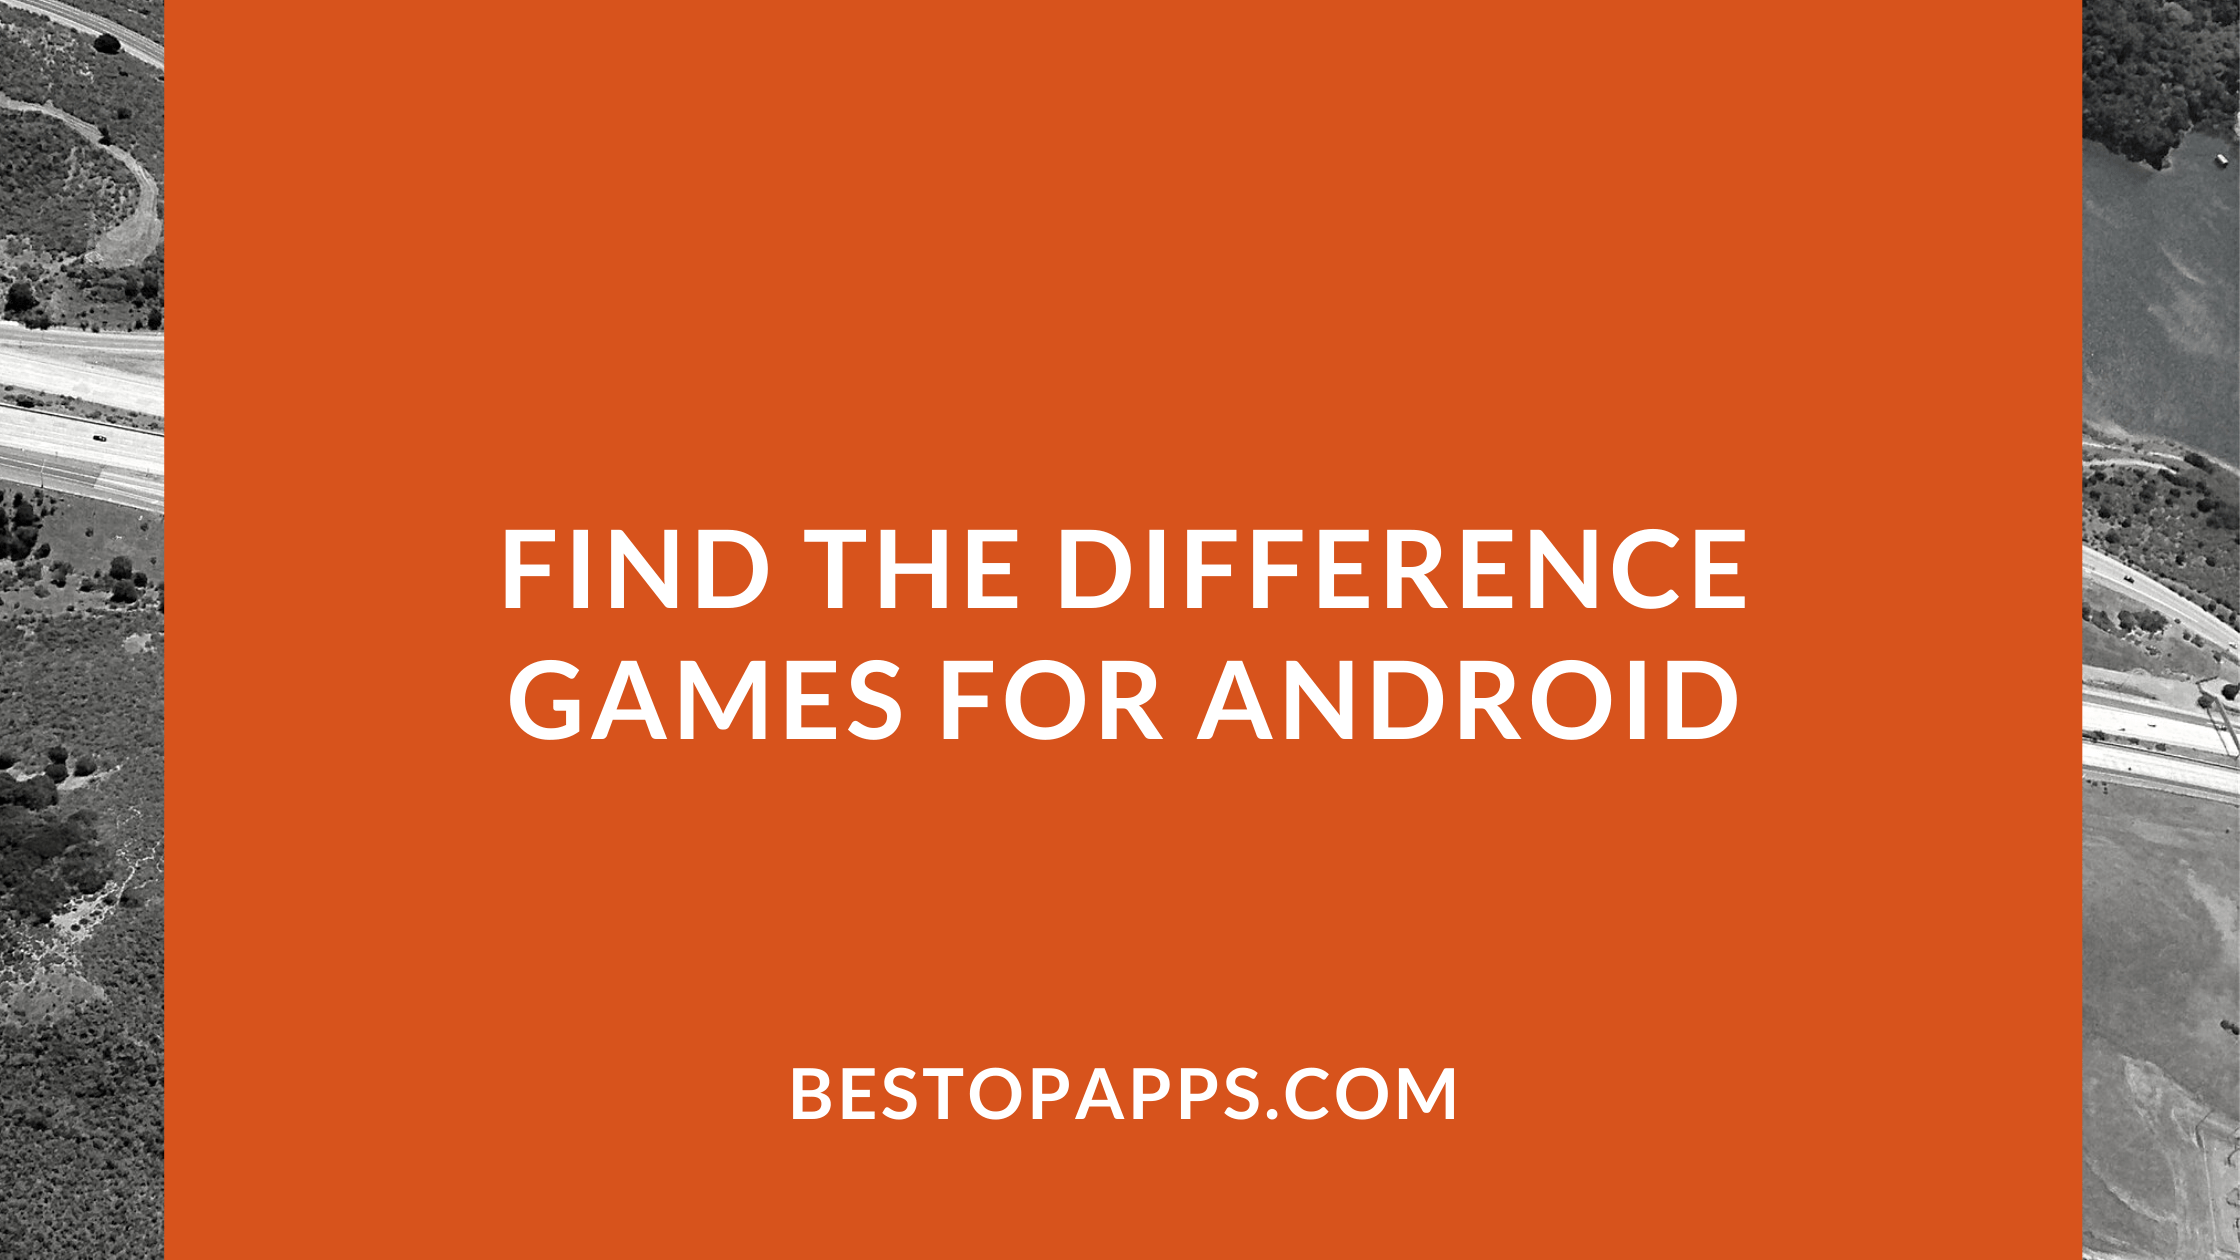 Find the Difference Games for Android